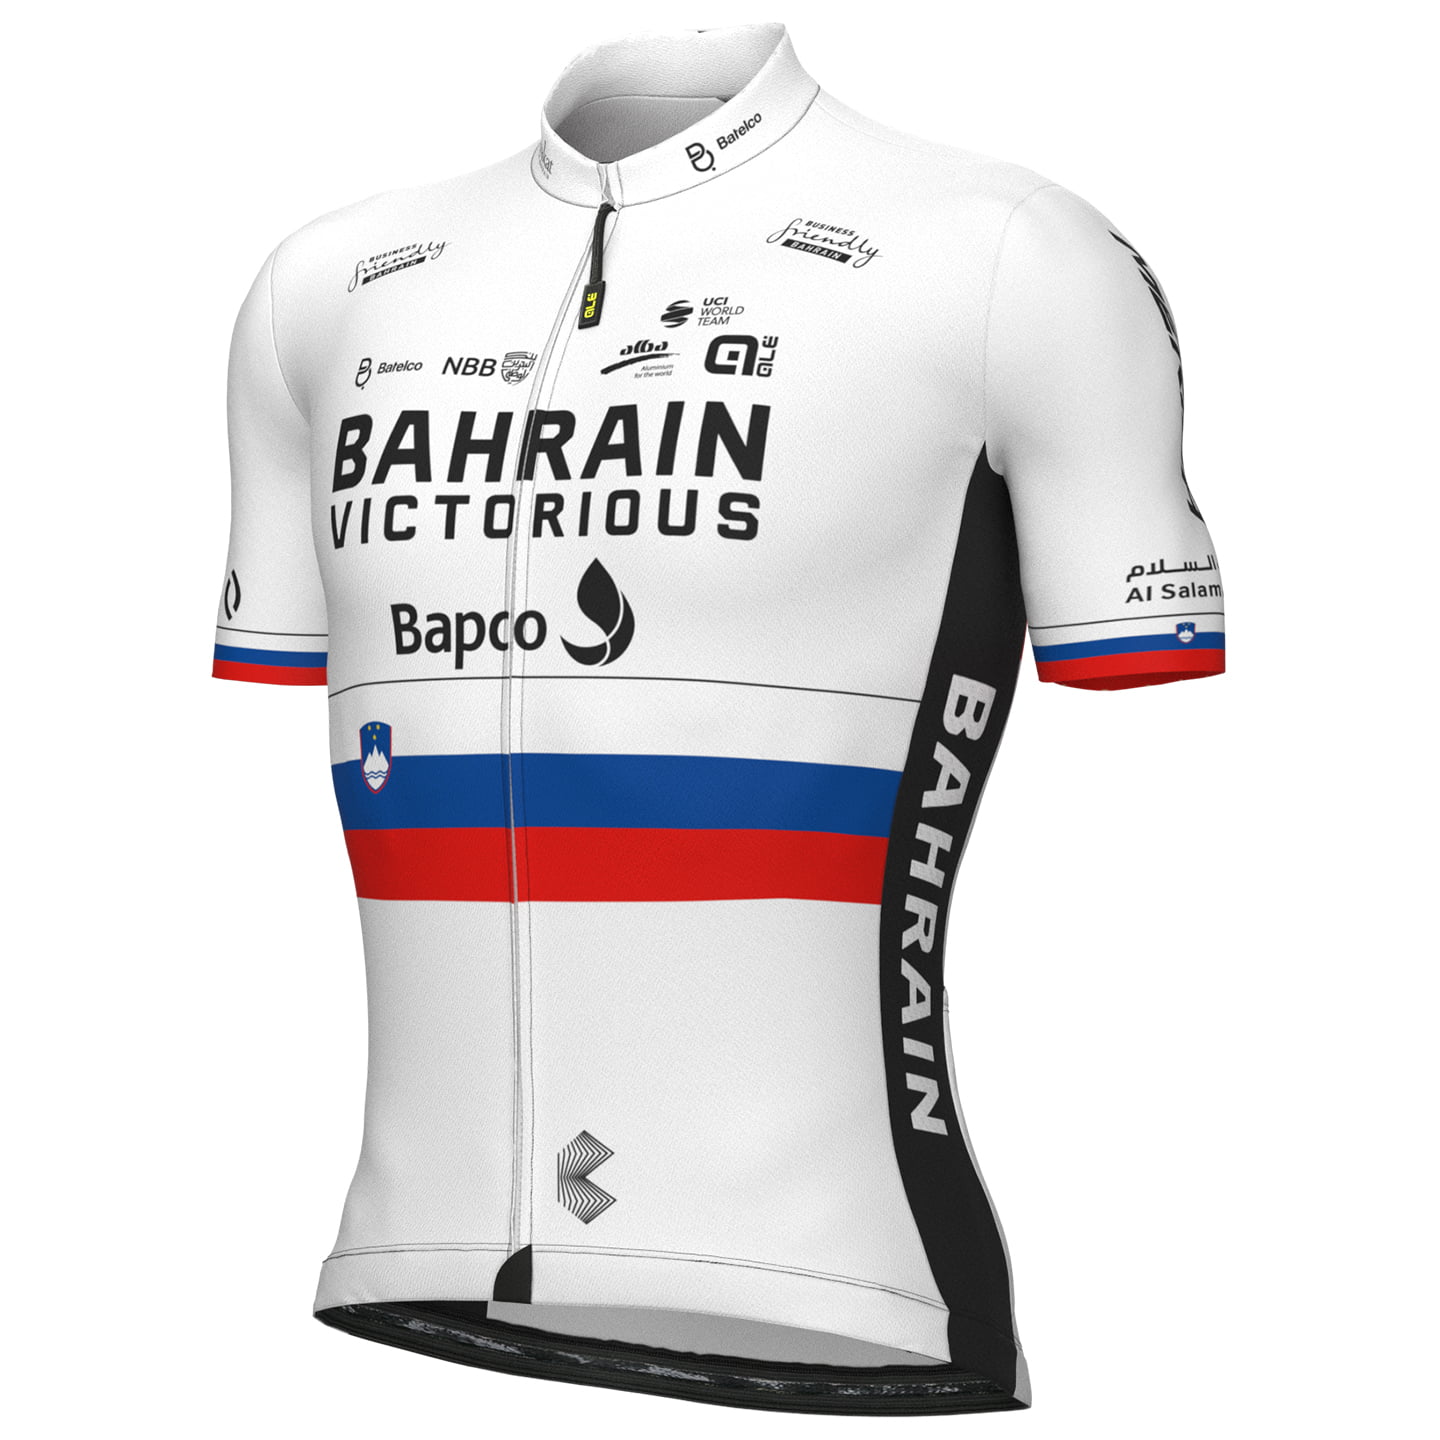 BAHRAIN - VICTORIOUS Short Sleeve Jersey Slovenian Champion 2022, for men, size XL, Bike Jersey, Cycle gear